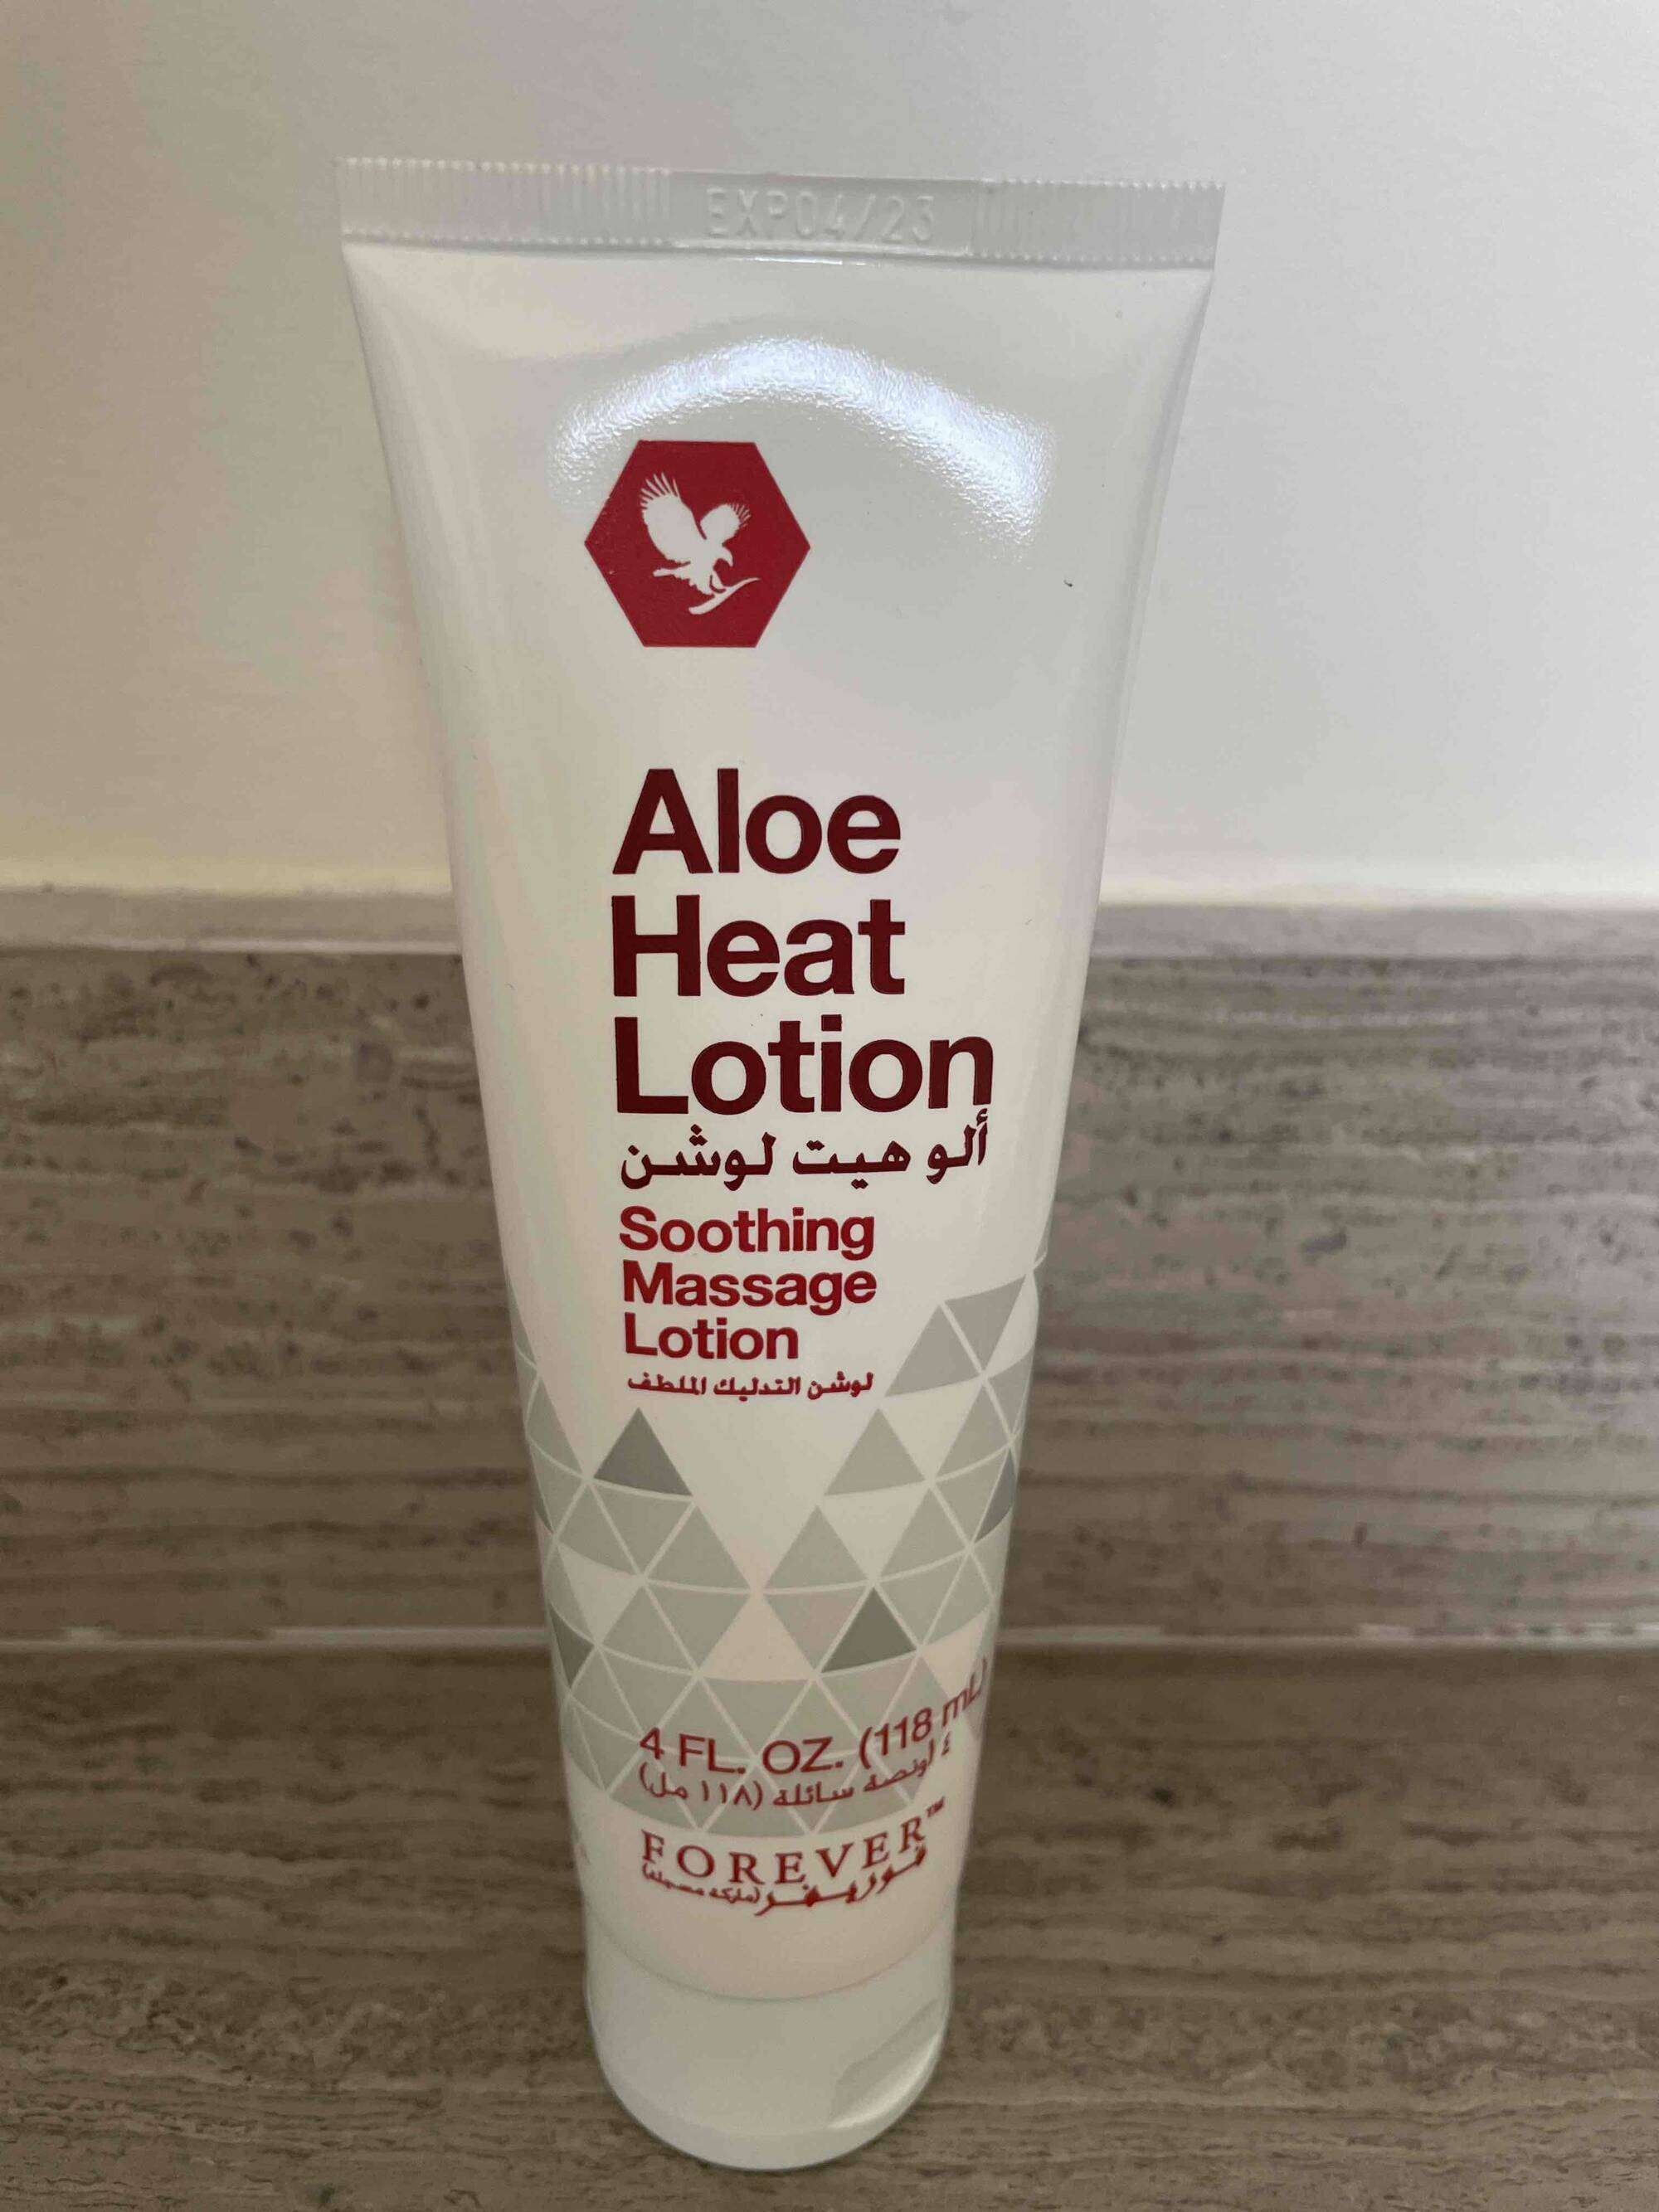 FOREVER - Aloe heat - Soothing massage lotion 